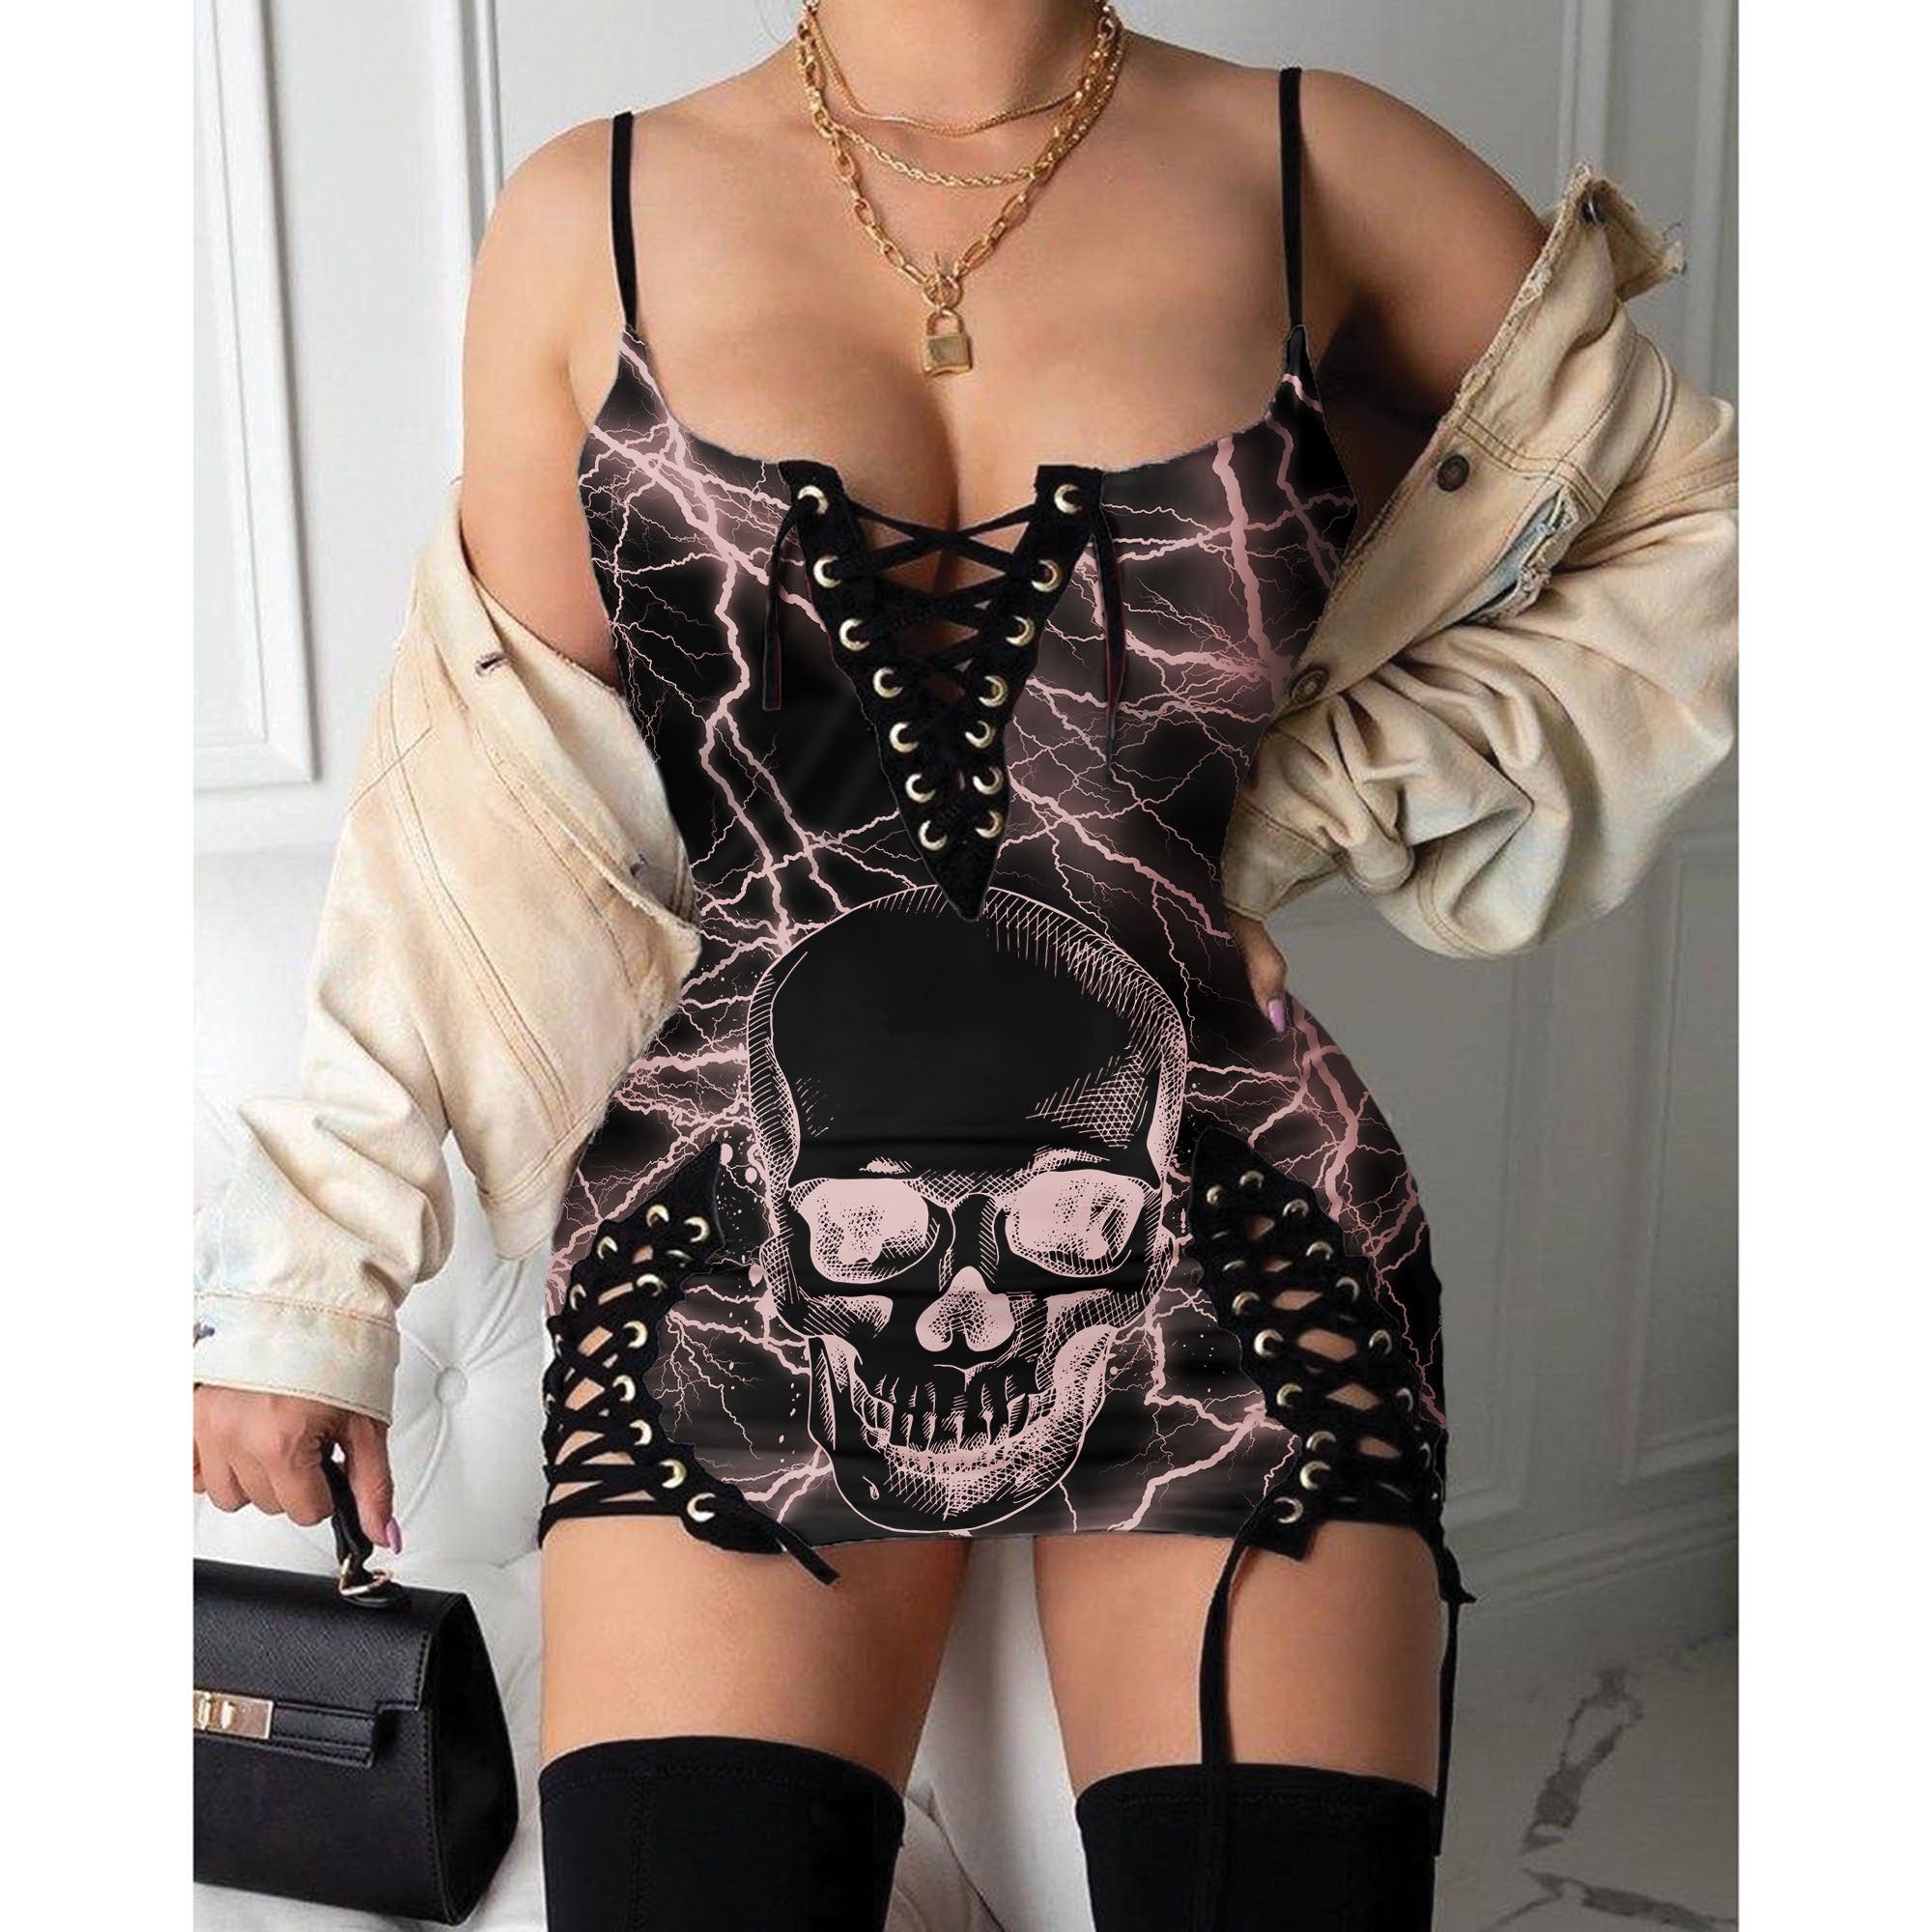 Express your personal style with the Hot Gothic Dress, a timeless piece featuring a unique Pink Thunder Skull, perfect for enhancing your daily fashion routine.